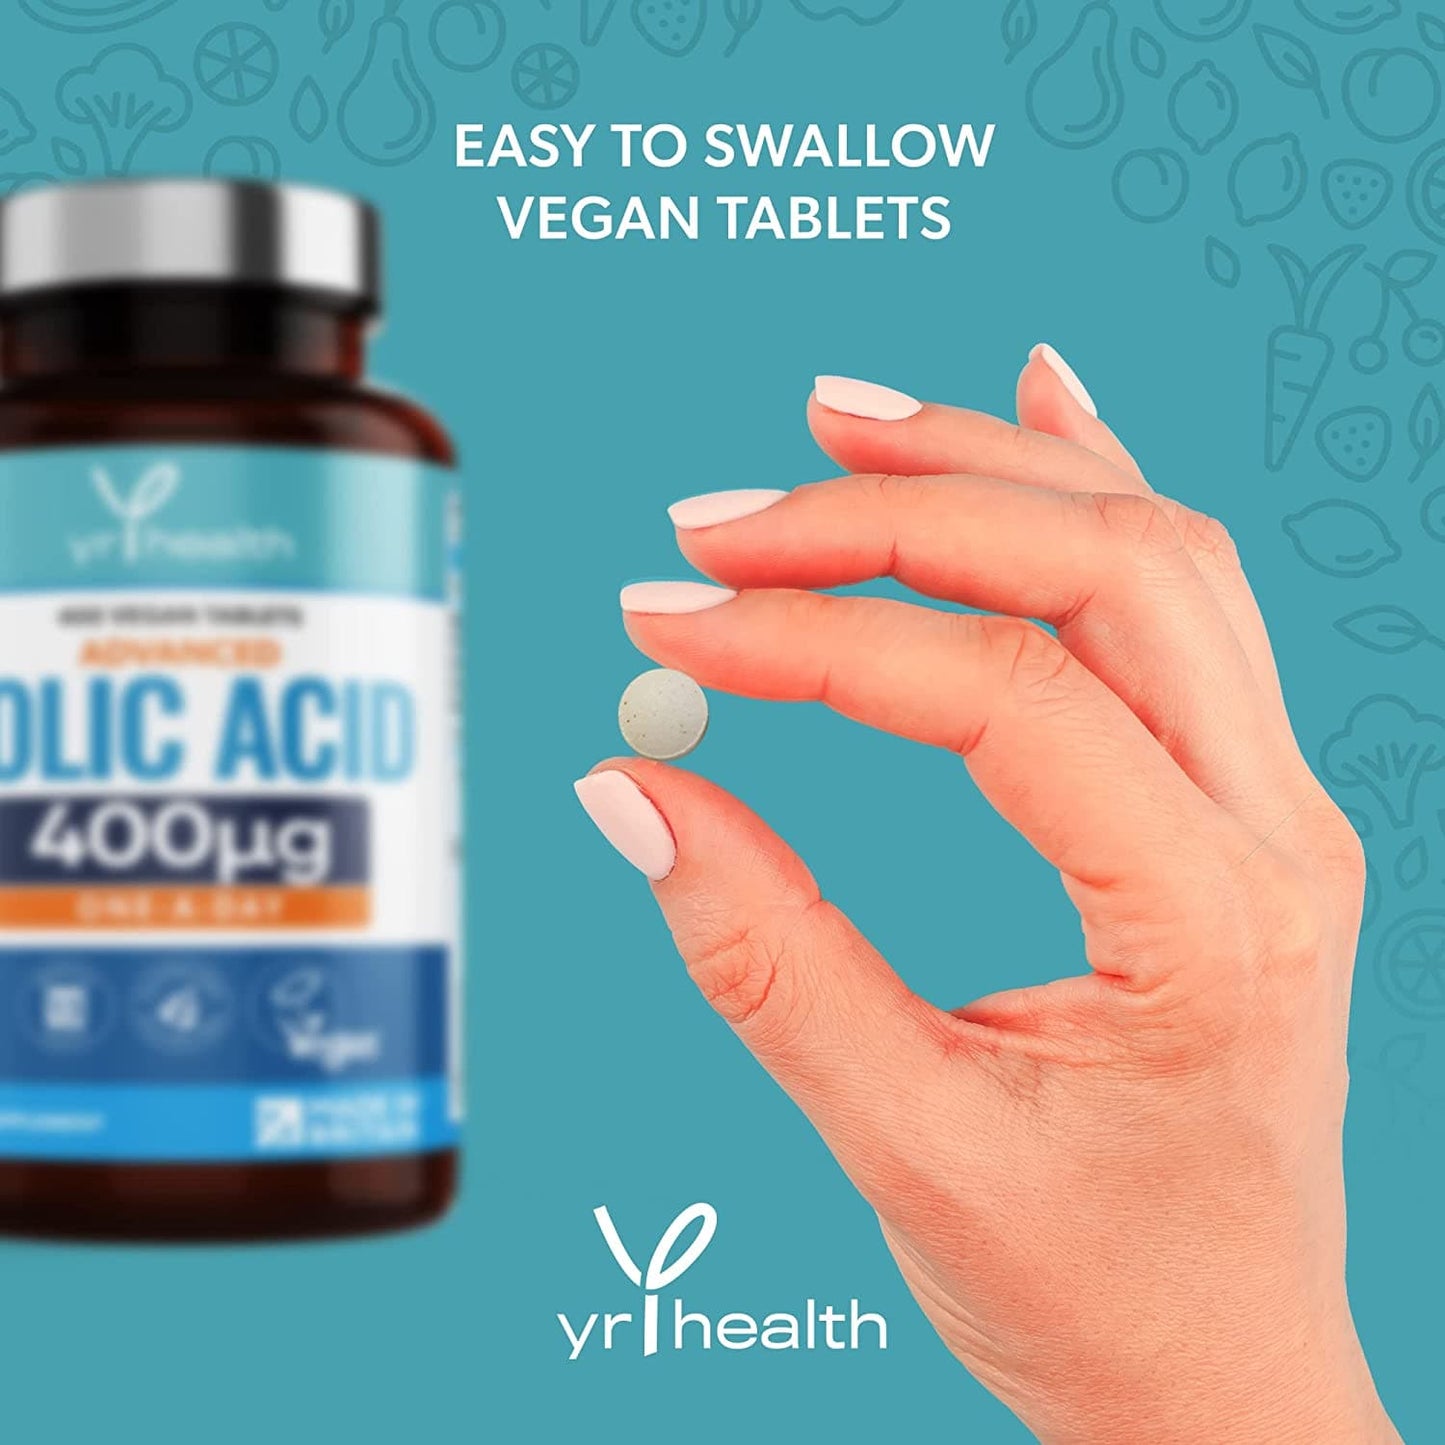 Load image into Gallery viewer, Folic Acid 400 mcg Tablets - 400 Vegan Vitamin B9 Tablets for Women, 13 Month Supply, Folic Acid Pregnancy for Normal Function of Immune System and Maternal Tissue Growth
